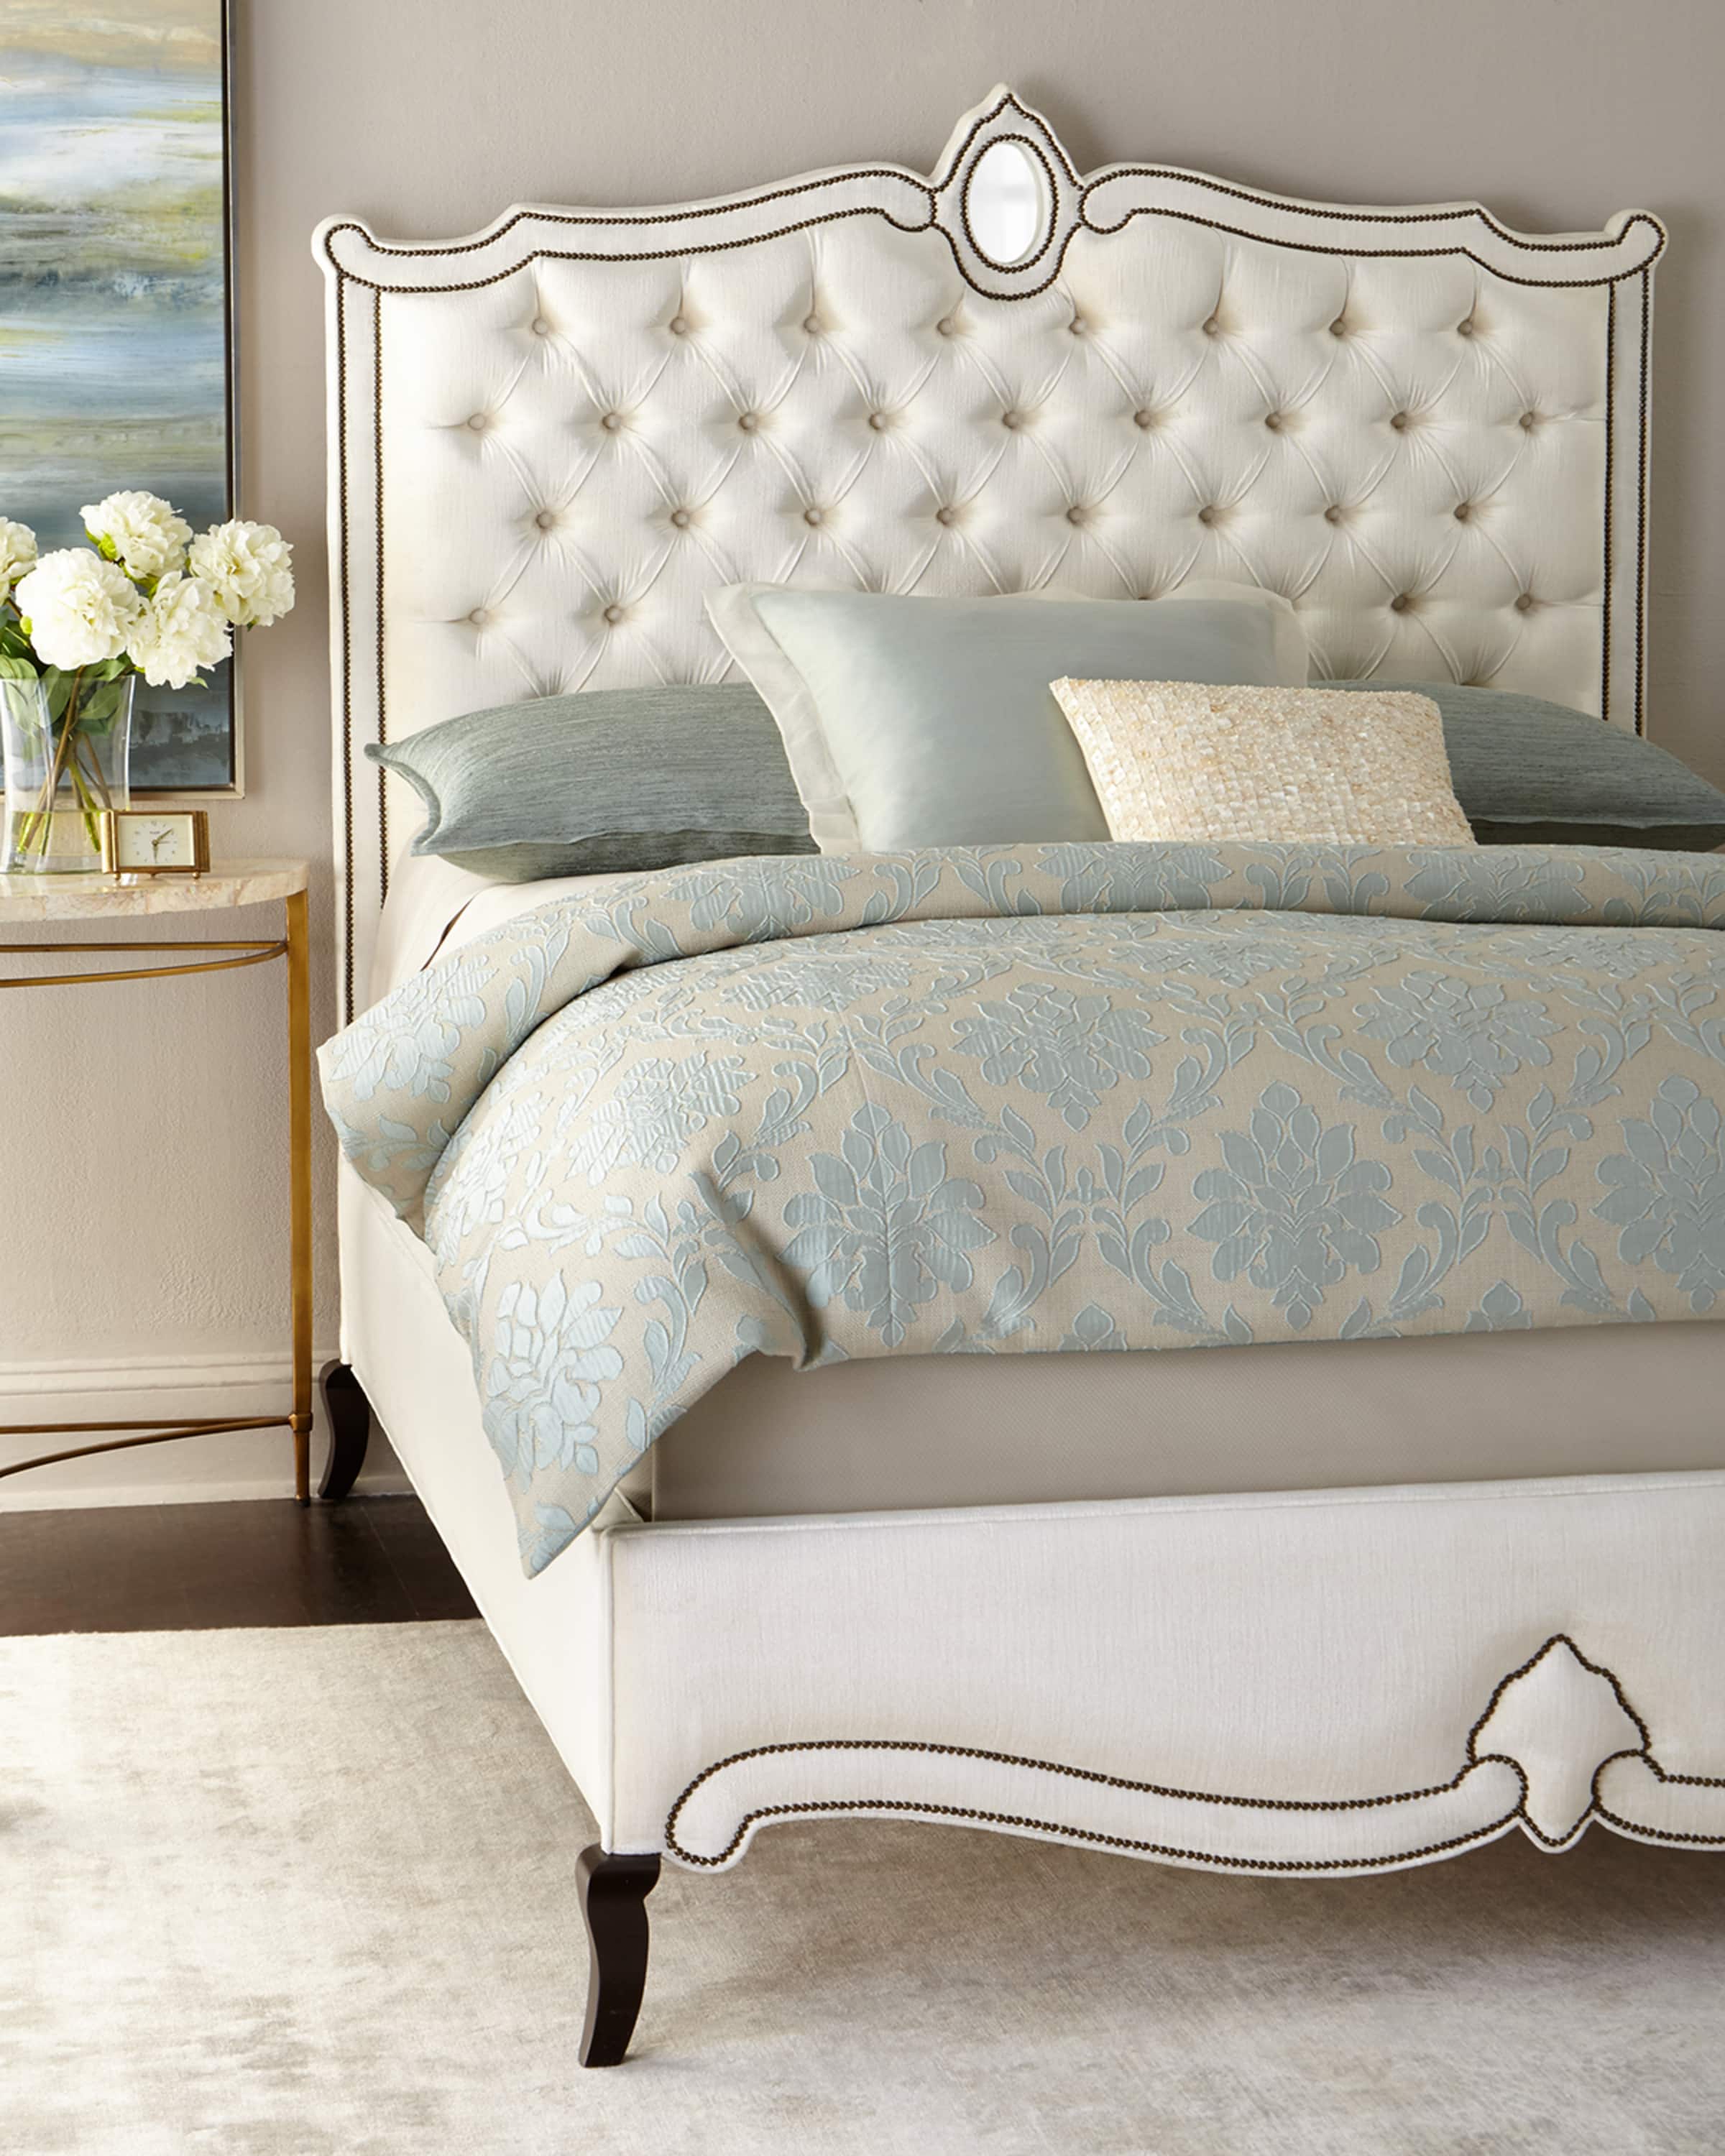 Haute House Christine Queen Bed